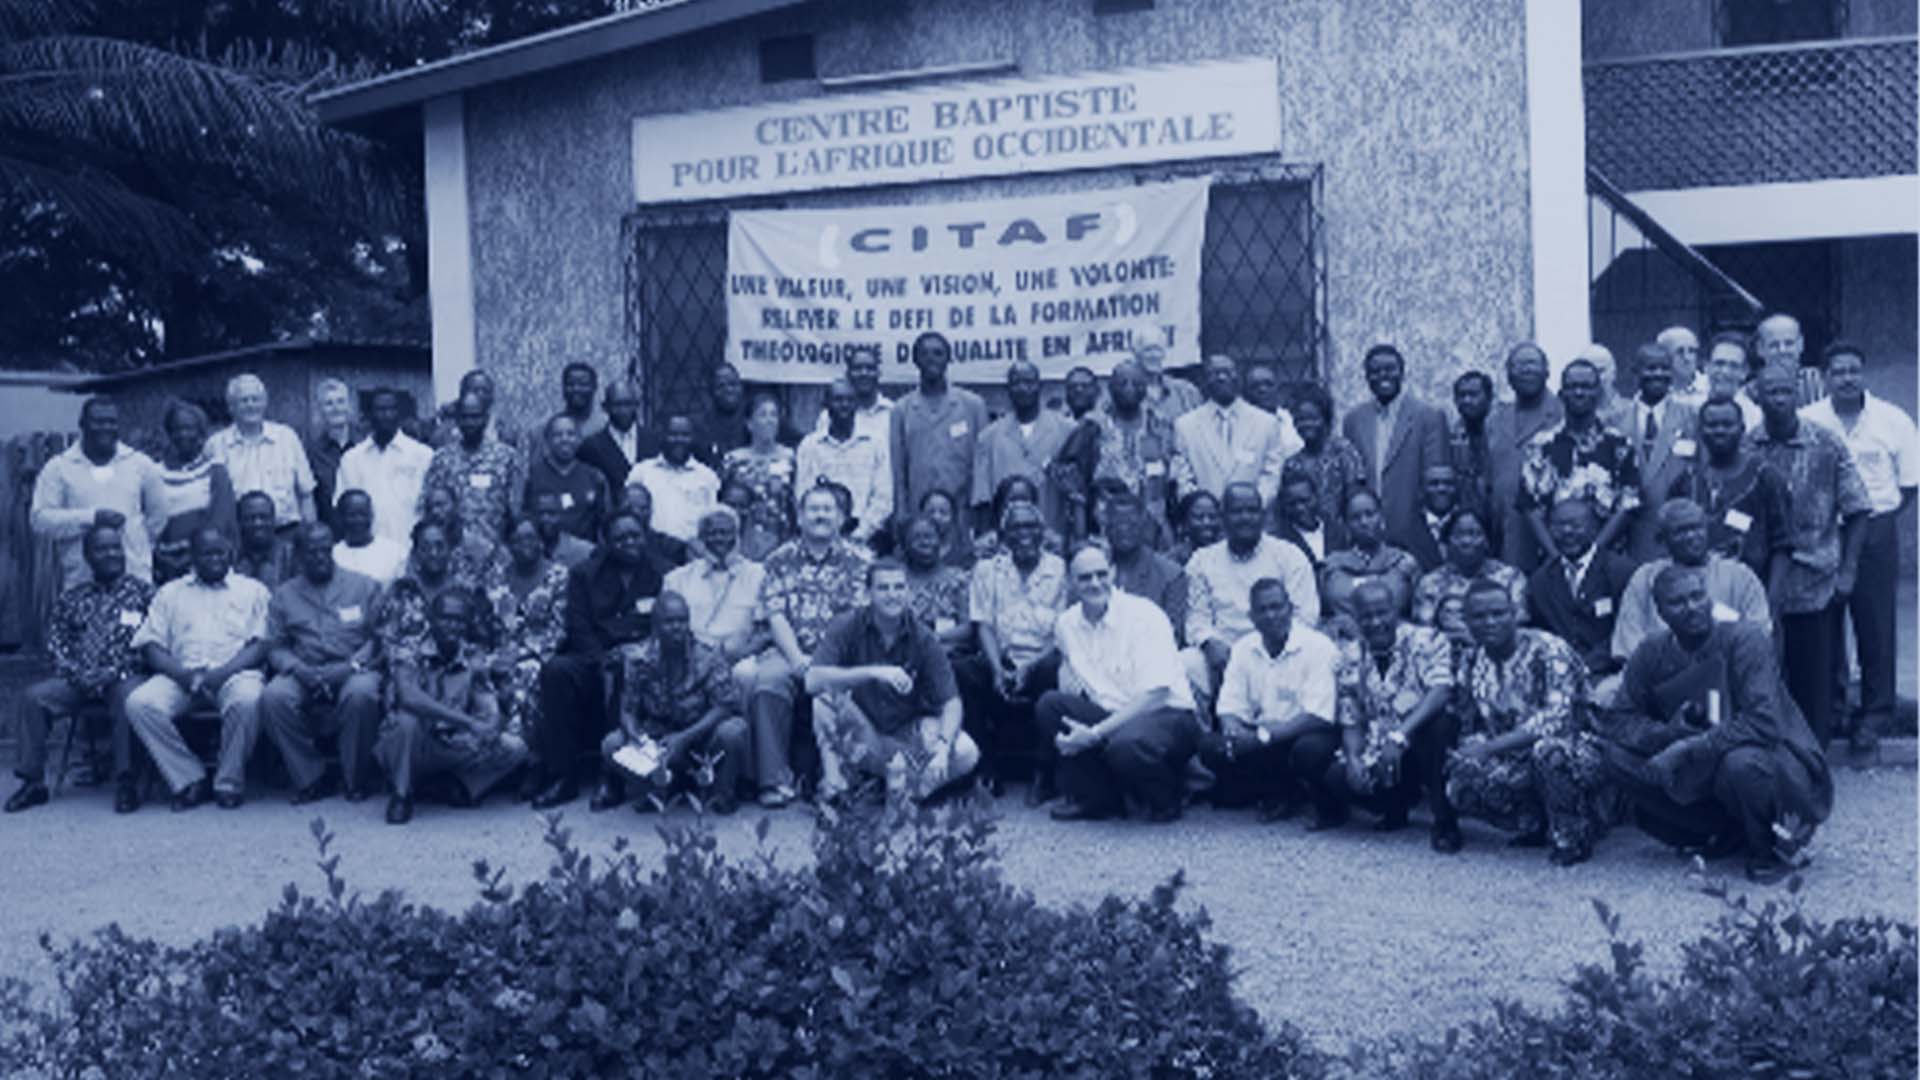 group photo in front of church building